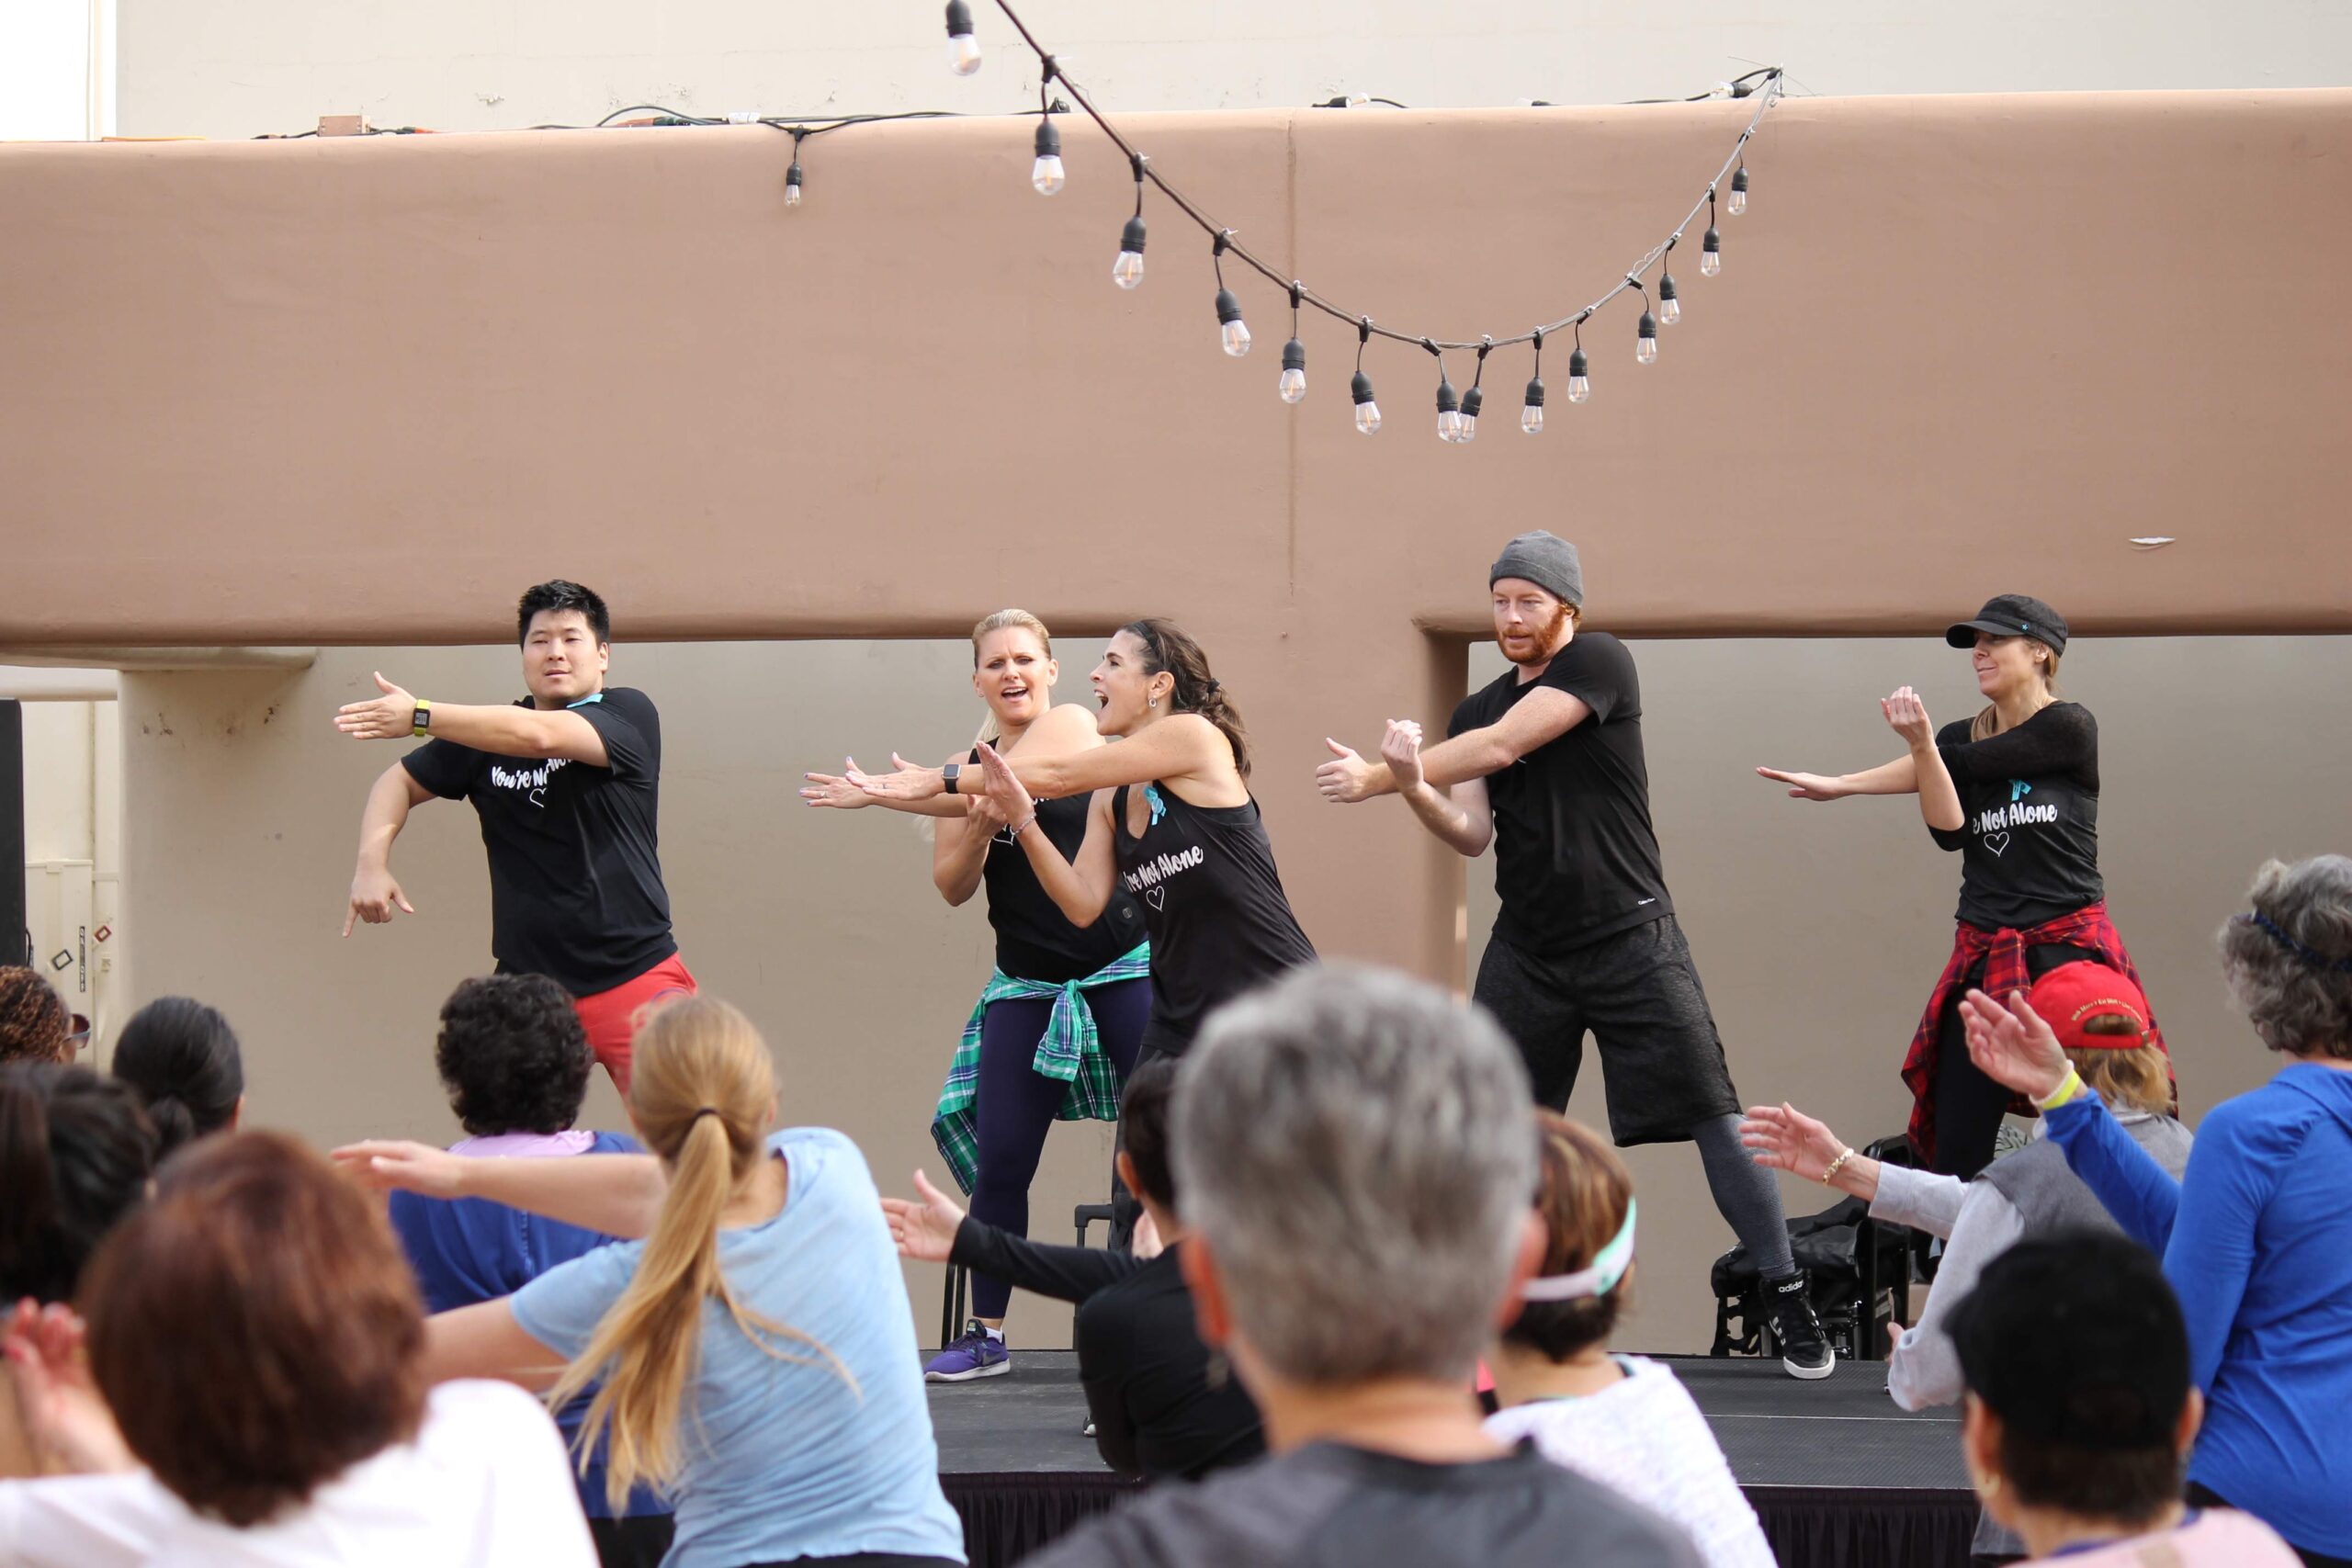 Photo of a dance instructor leading a group of people at a Zumbathon fundraiser.